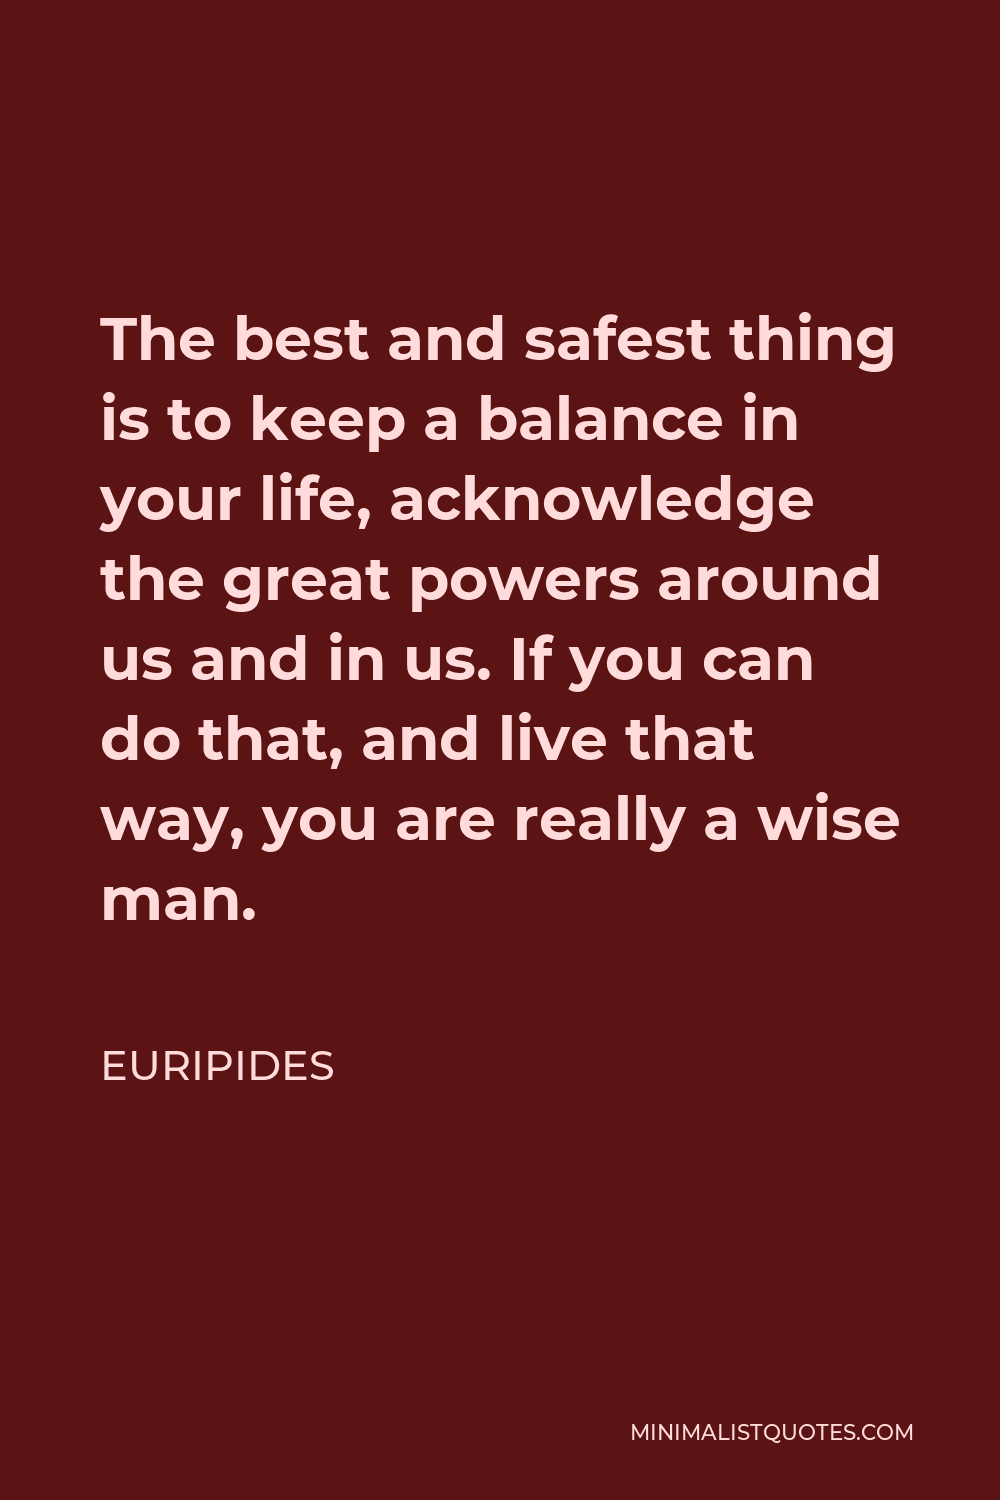 Euripides Quote - The best and safest thing is to keep a balance in your life, acknowledge the great powers around us and in us. If you can do that, and live that way, you are really a wise man.